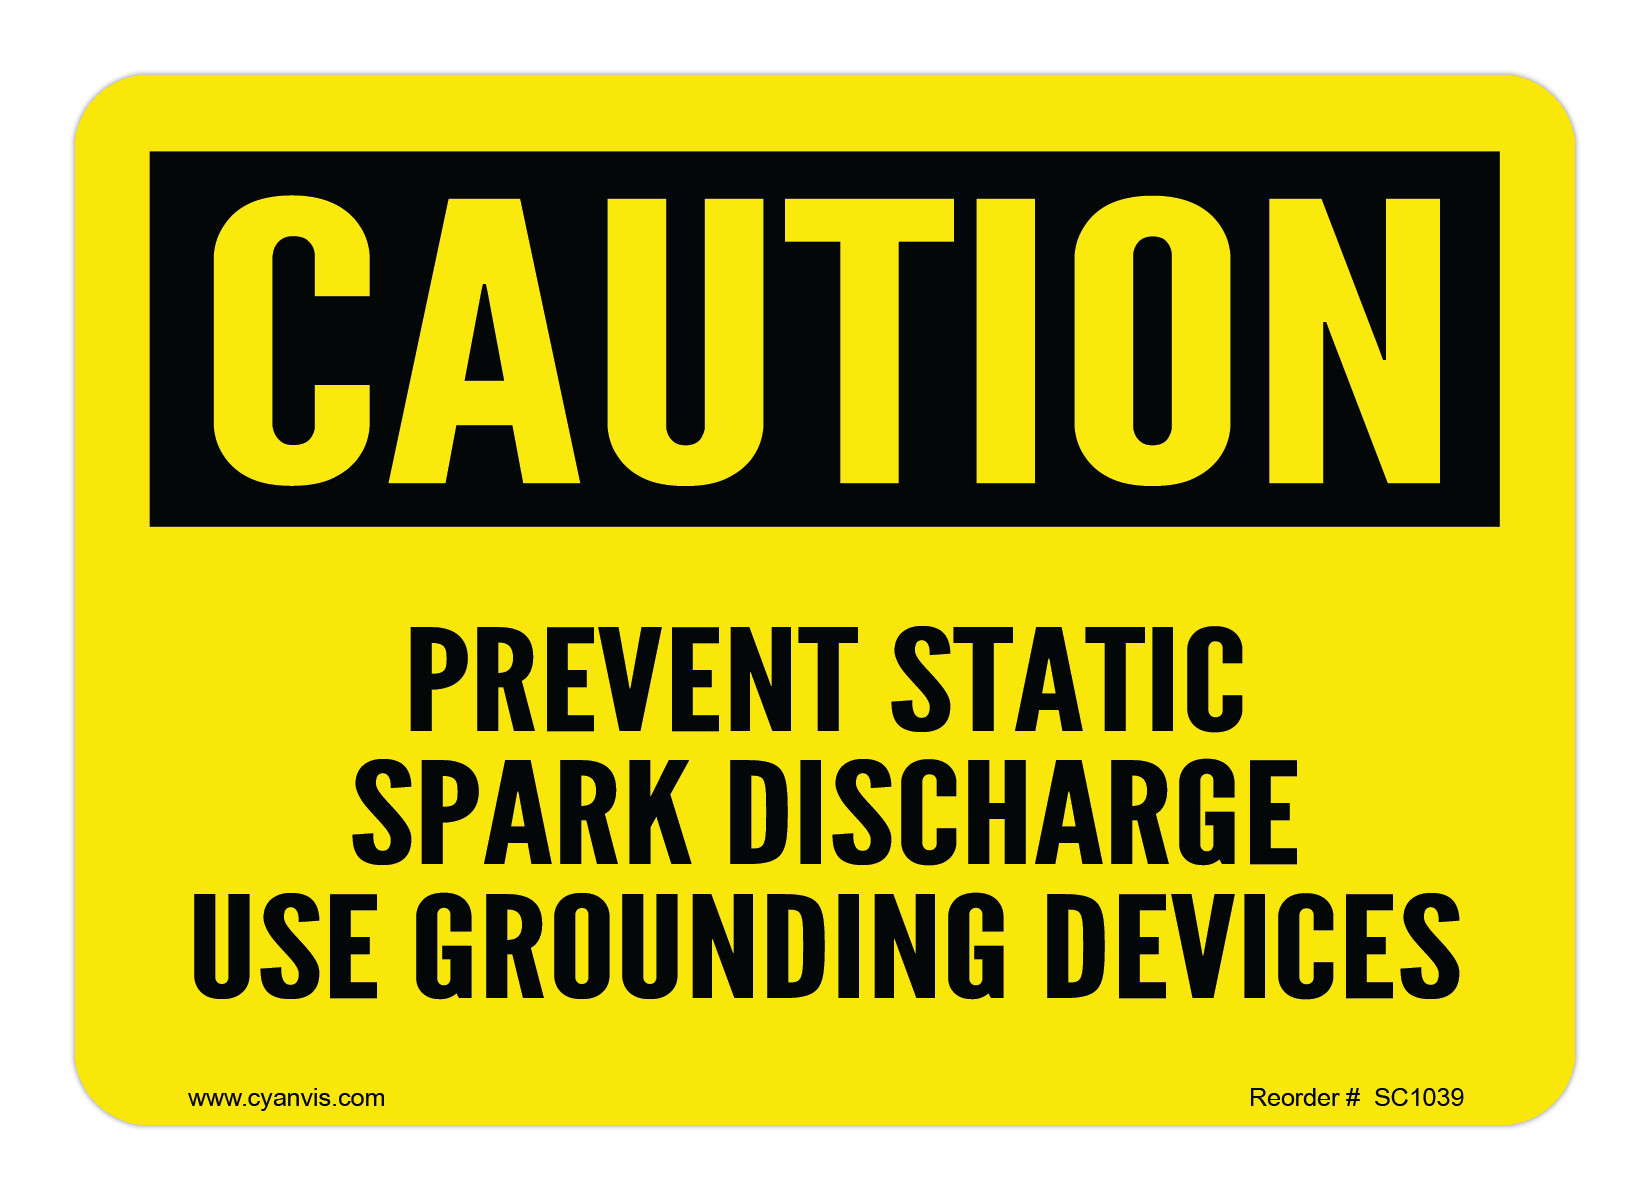 Safety Sign: Caution - PREVENT STATIC SPARK DISCHARGE USE GROUNDING DEVICES - CYANvisuals